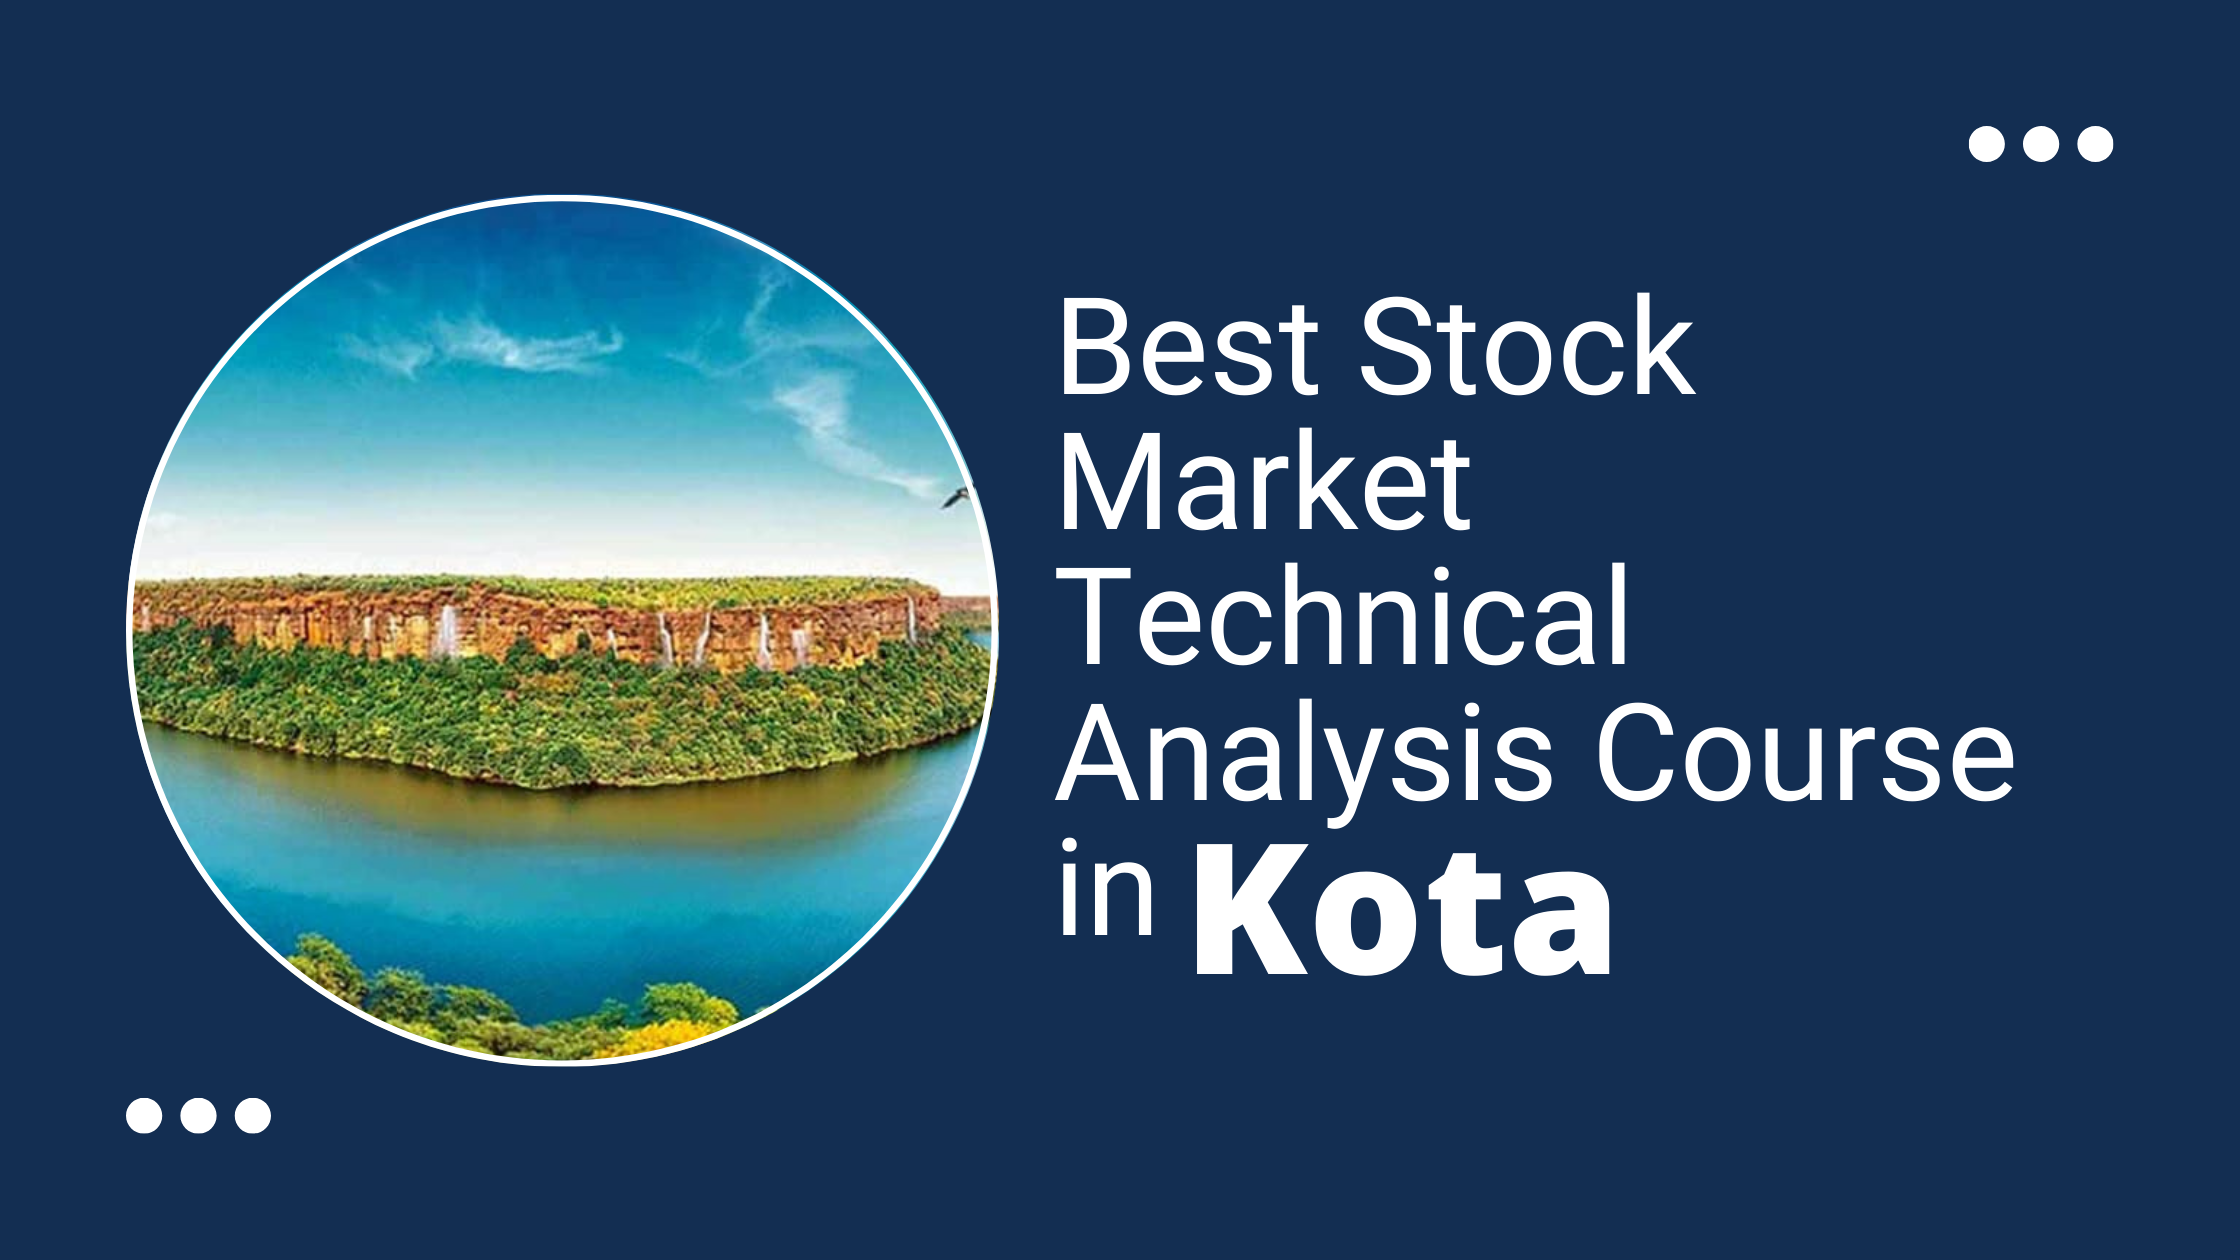 Technical Analysis Course in Kota